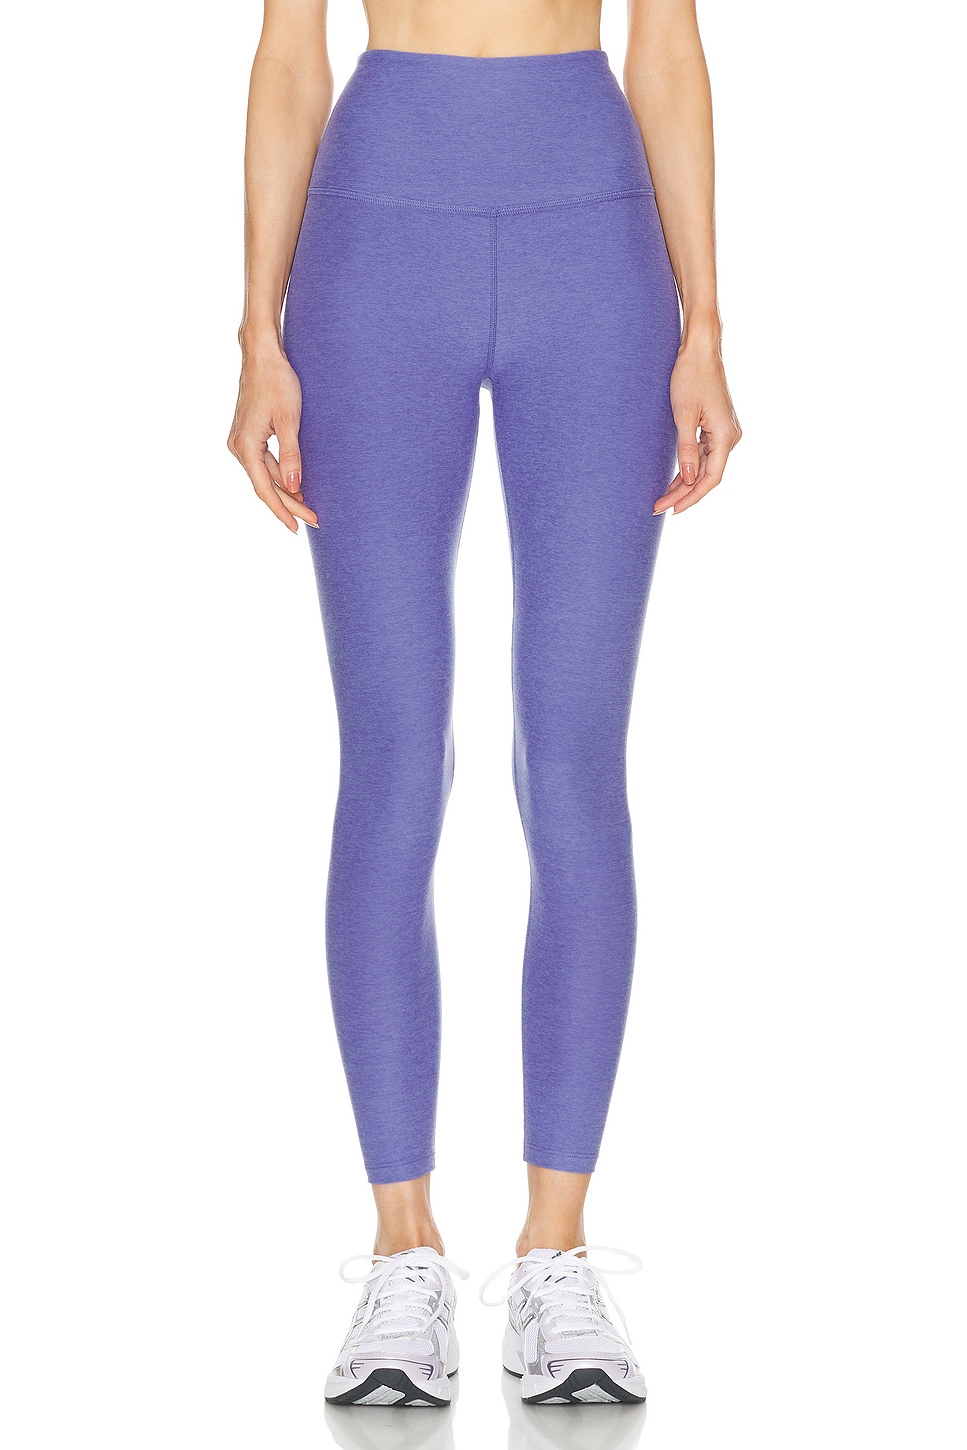 Image 1 of Beyond Yoga Spacedye Caught In The Midi High Waisted Legging in Indigo Heather